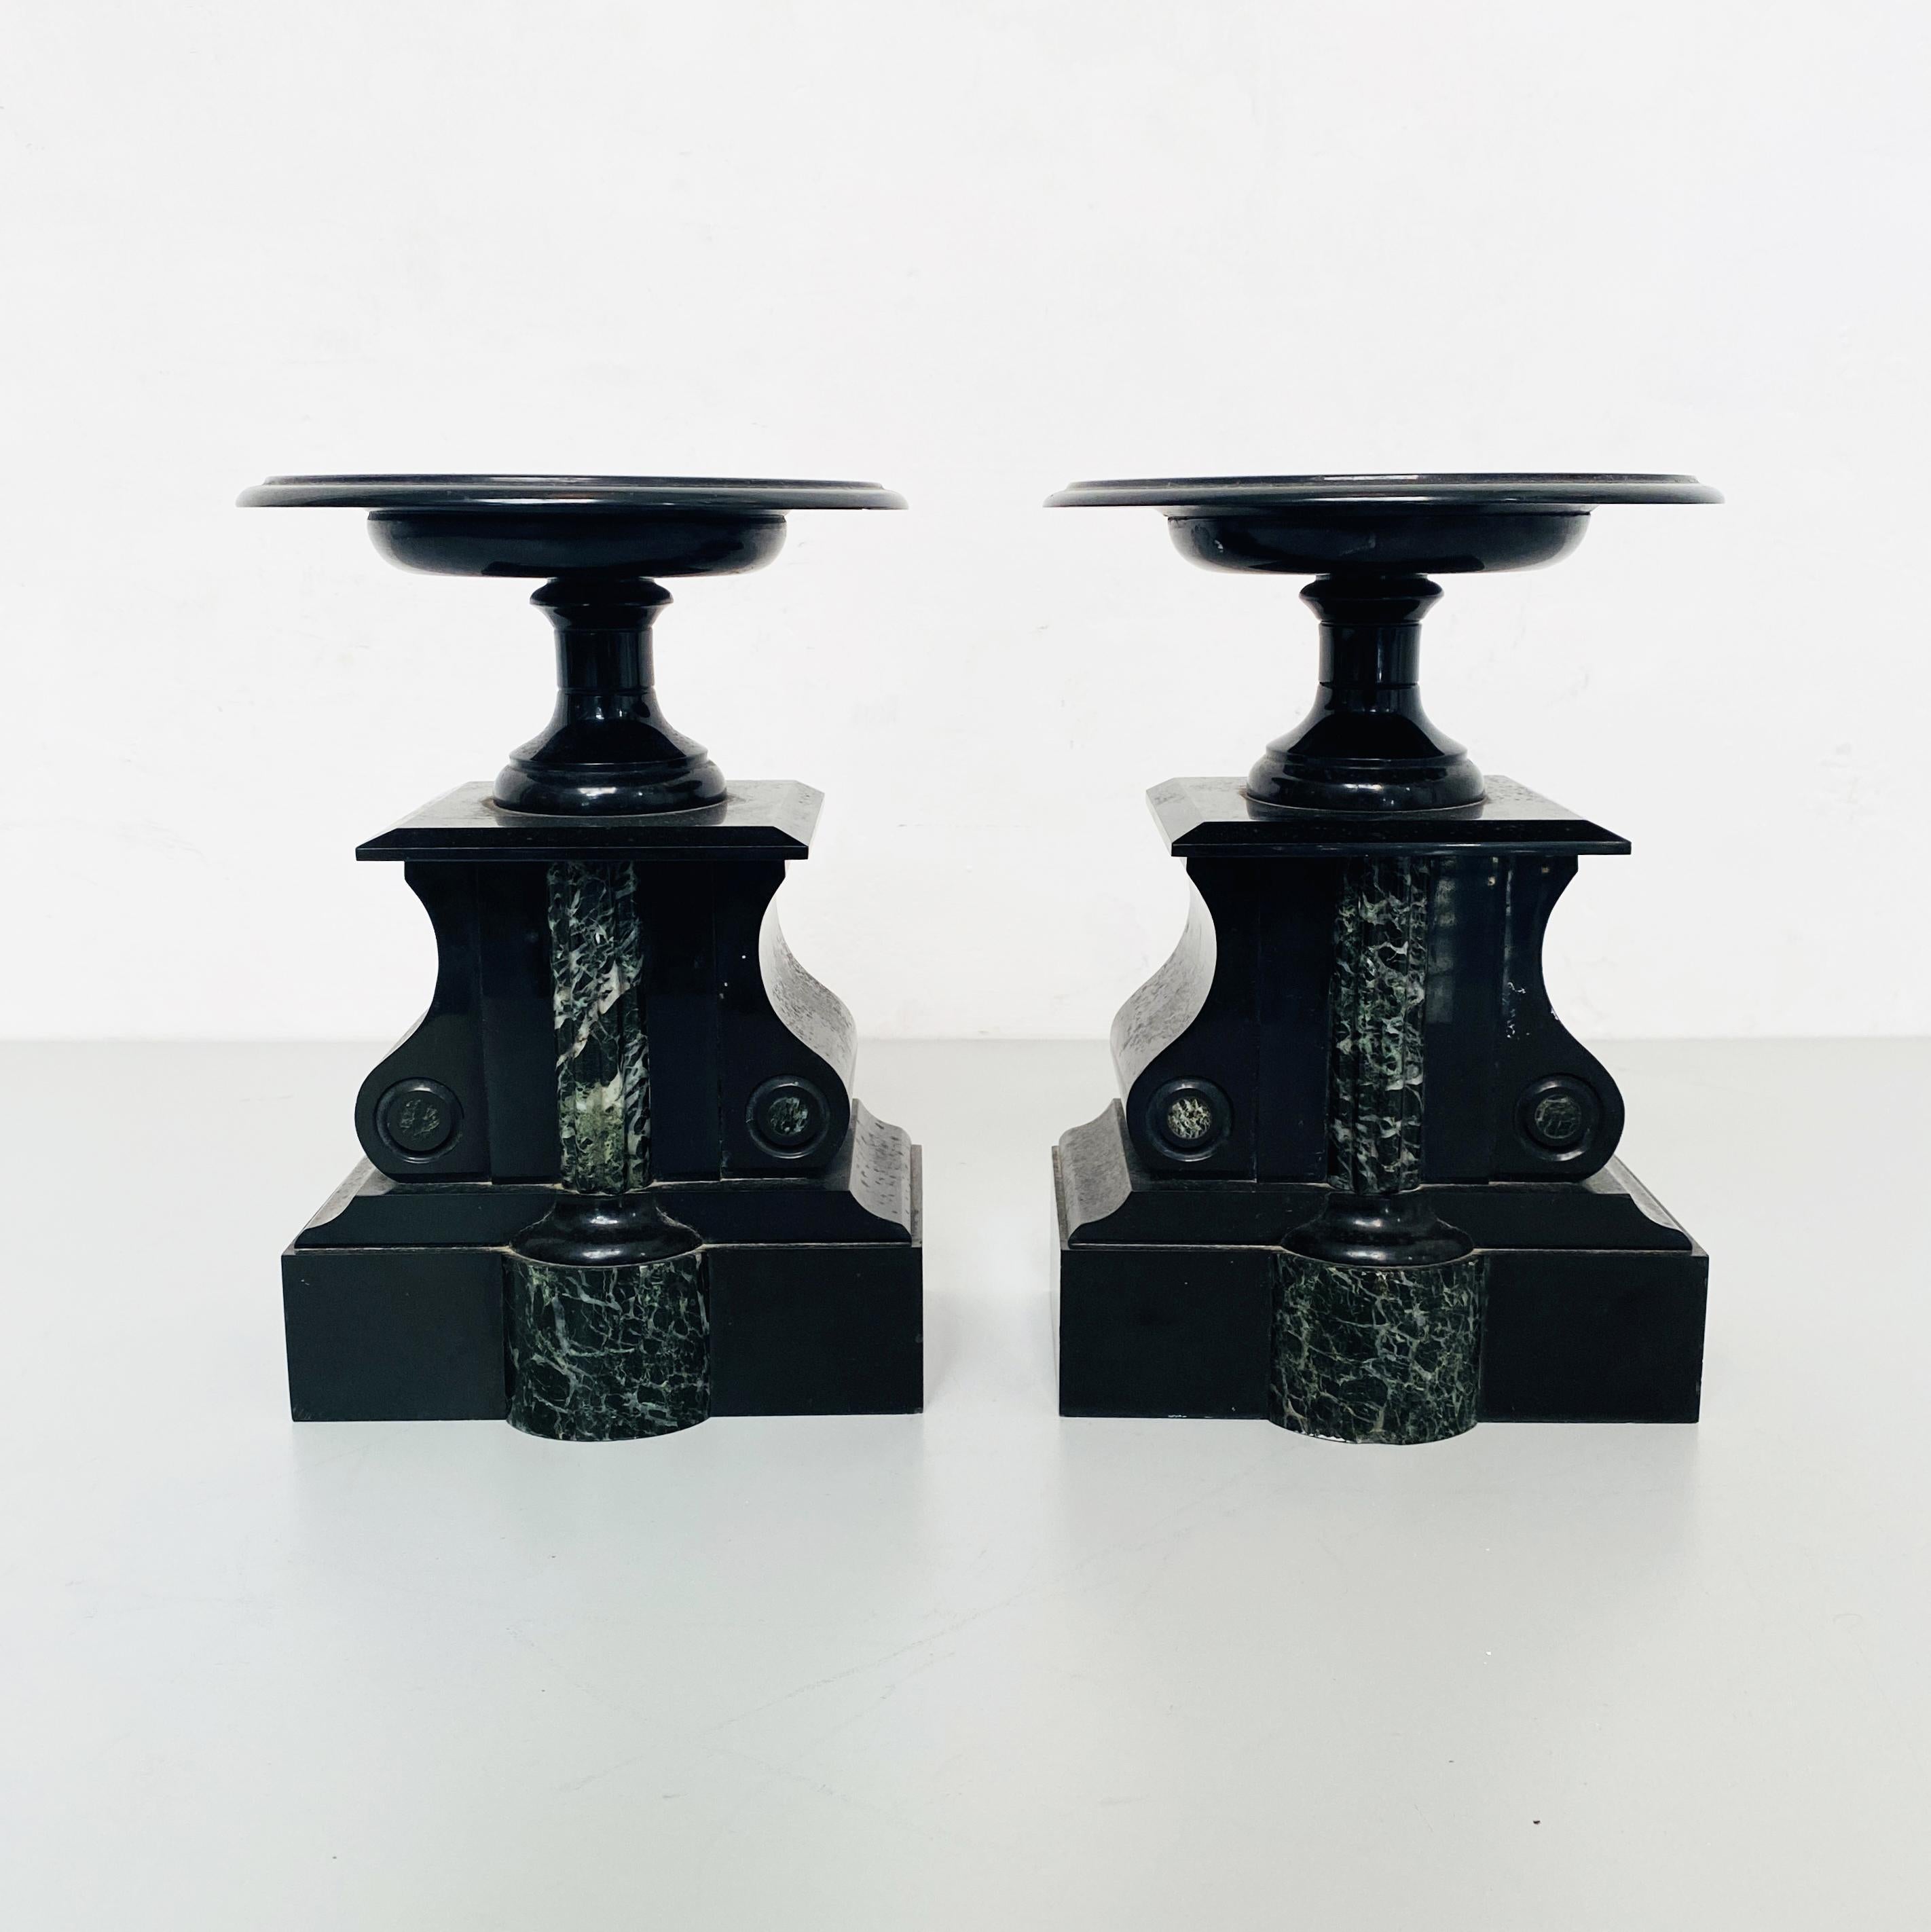 Italian Art Deco Black onyx centerpieces with shape of a balance, 1940s
Pair of centerpieces in the shape of a balance in black onyx. Hand crafted and carved.
1940s
Good condition, with defects.
Measurements in cm 19x19x25h.
 